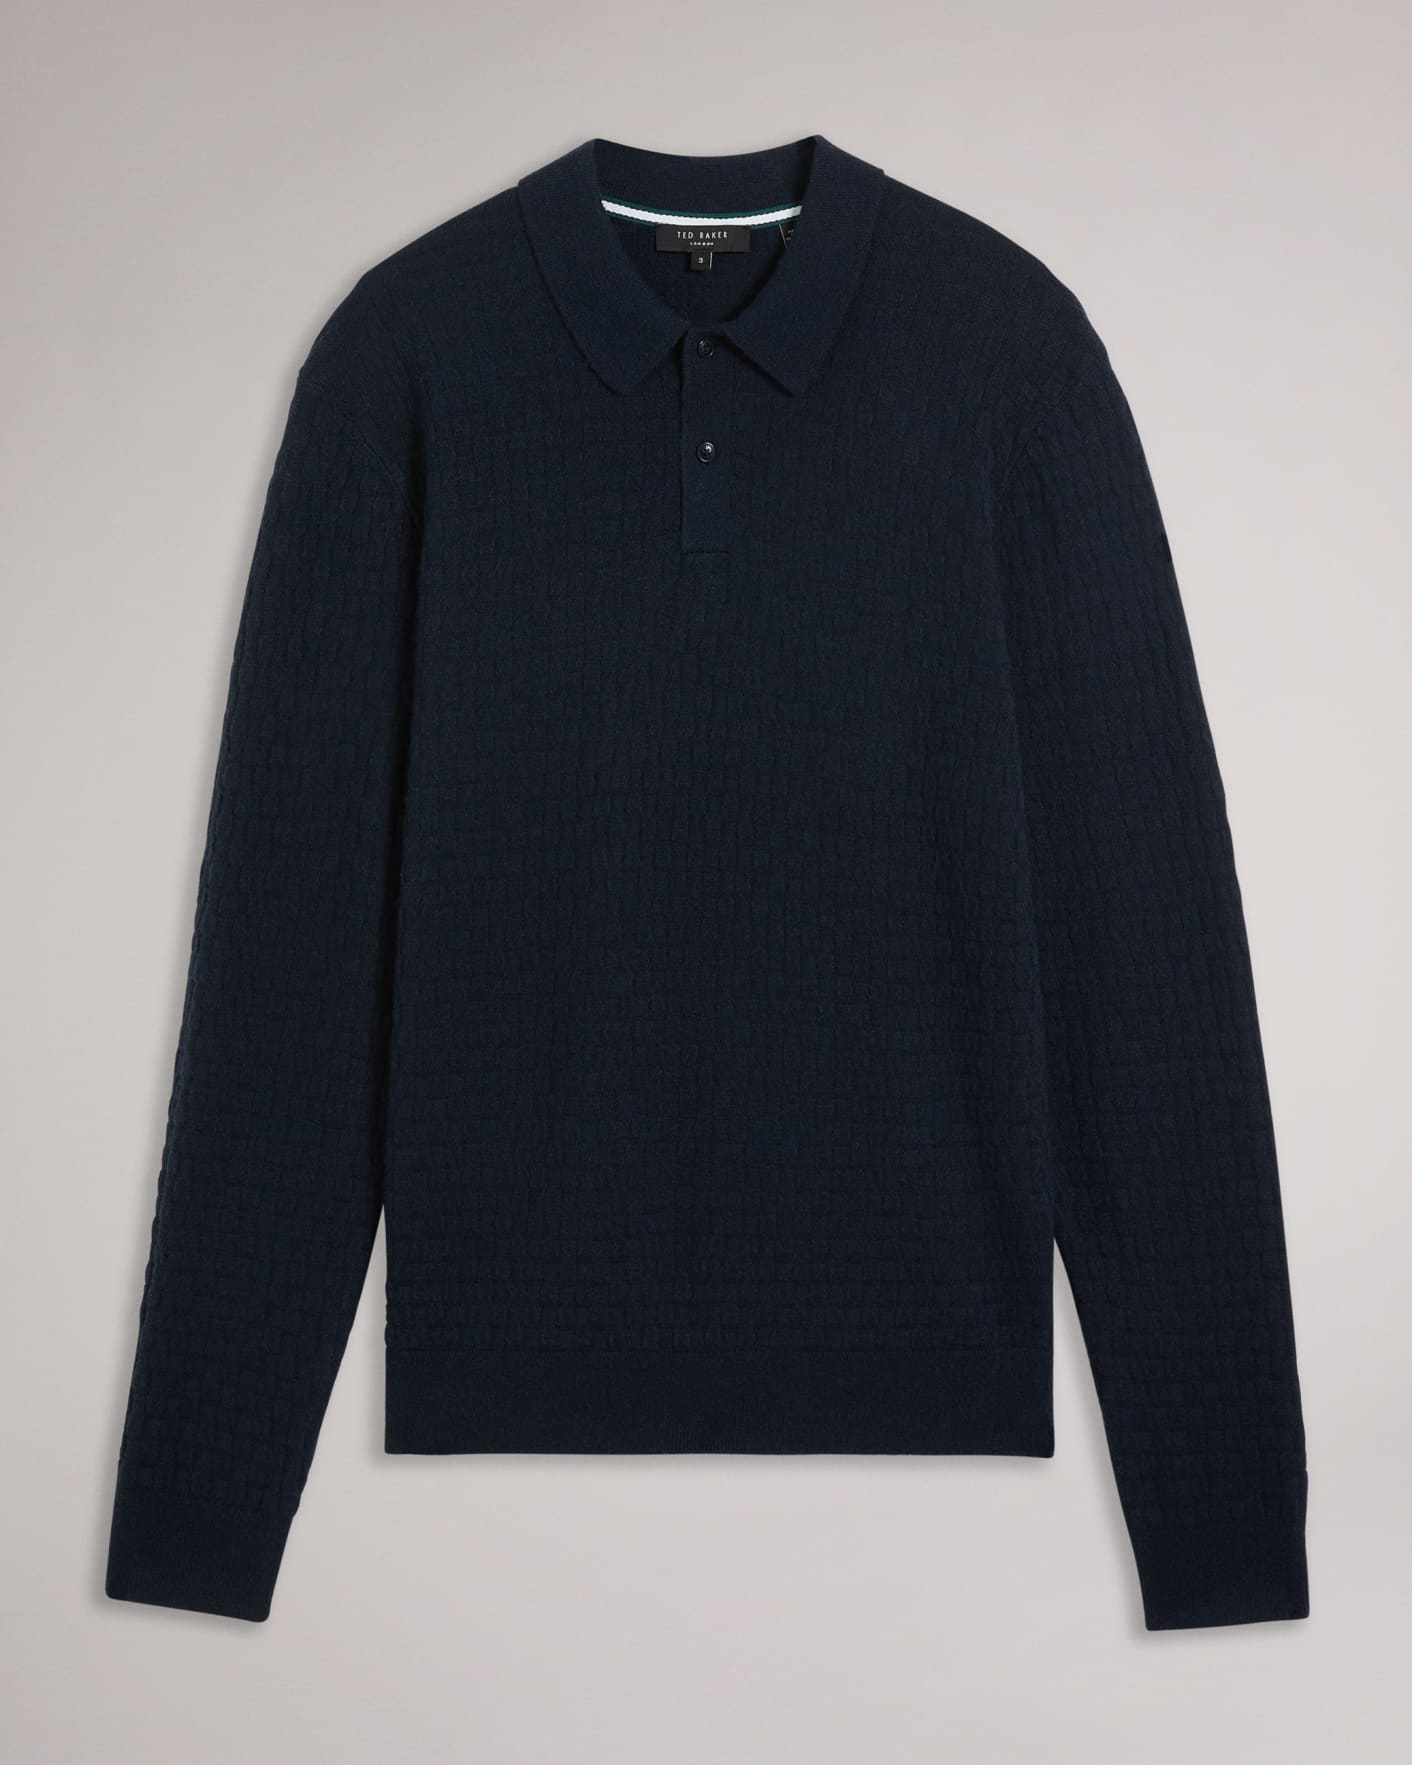 NAVY Long Sleeve Knitted Polo Shirt Ted Baker